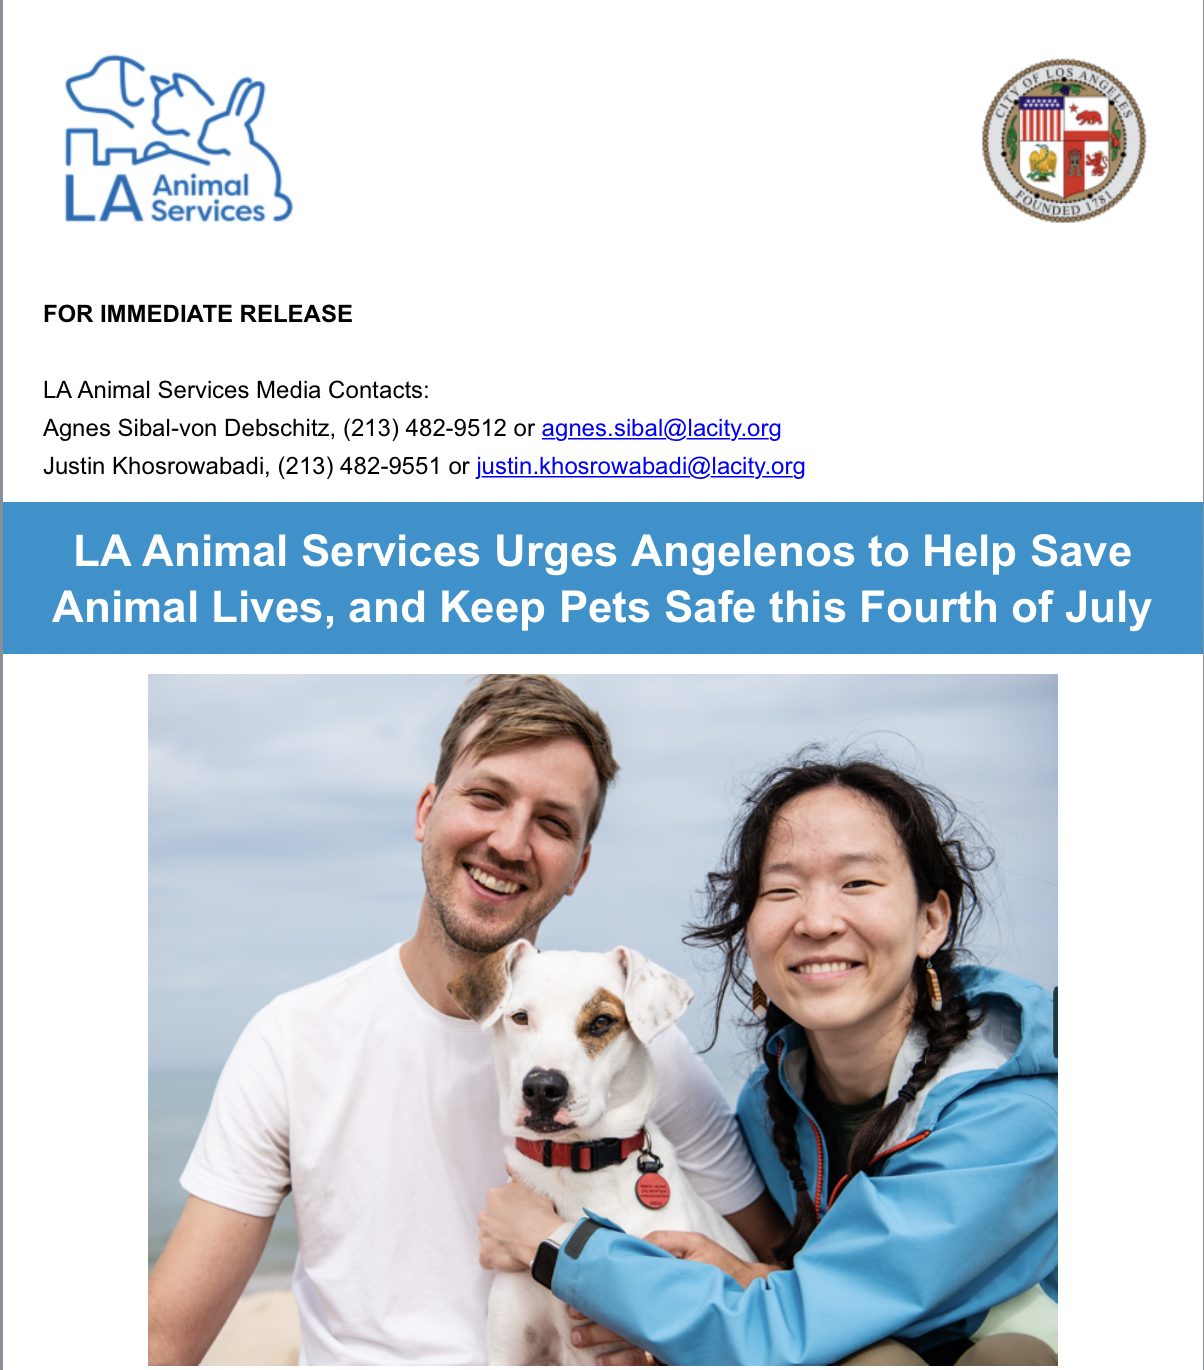 Keep Animals Safe this 4th of July